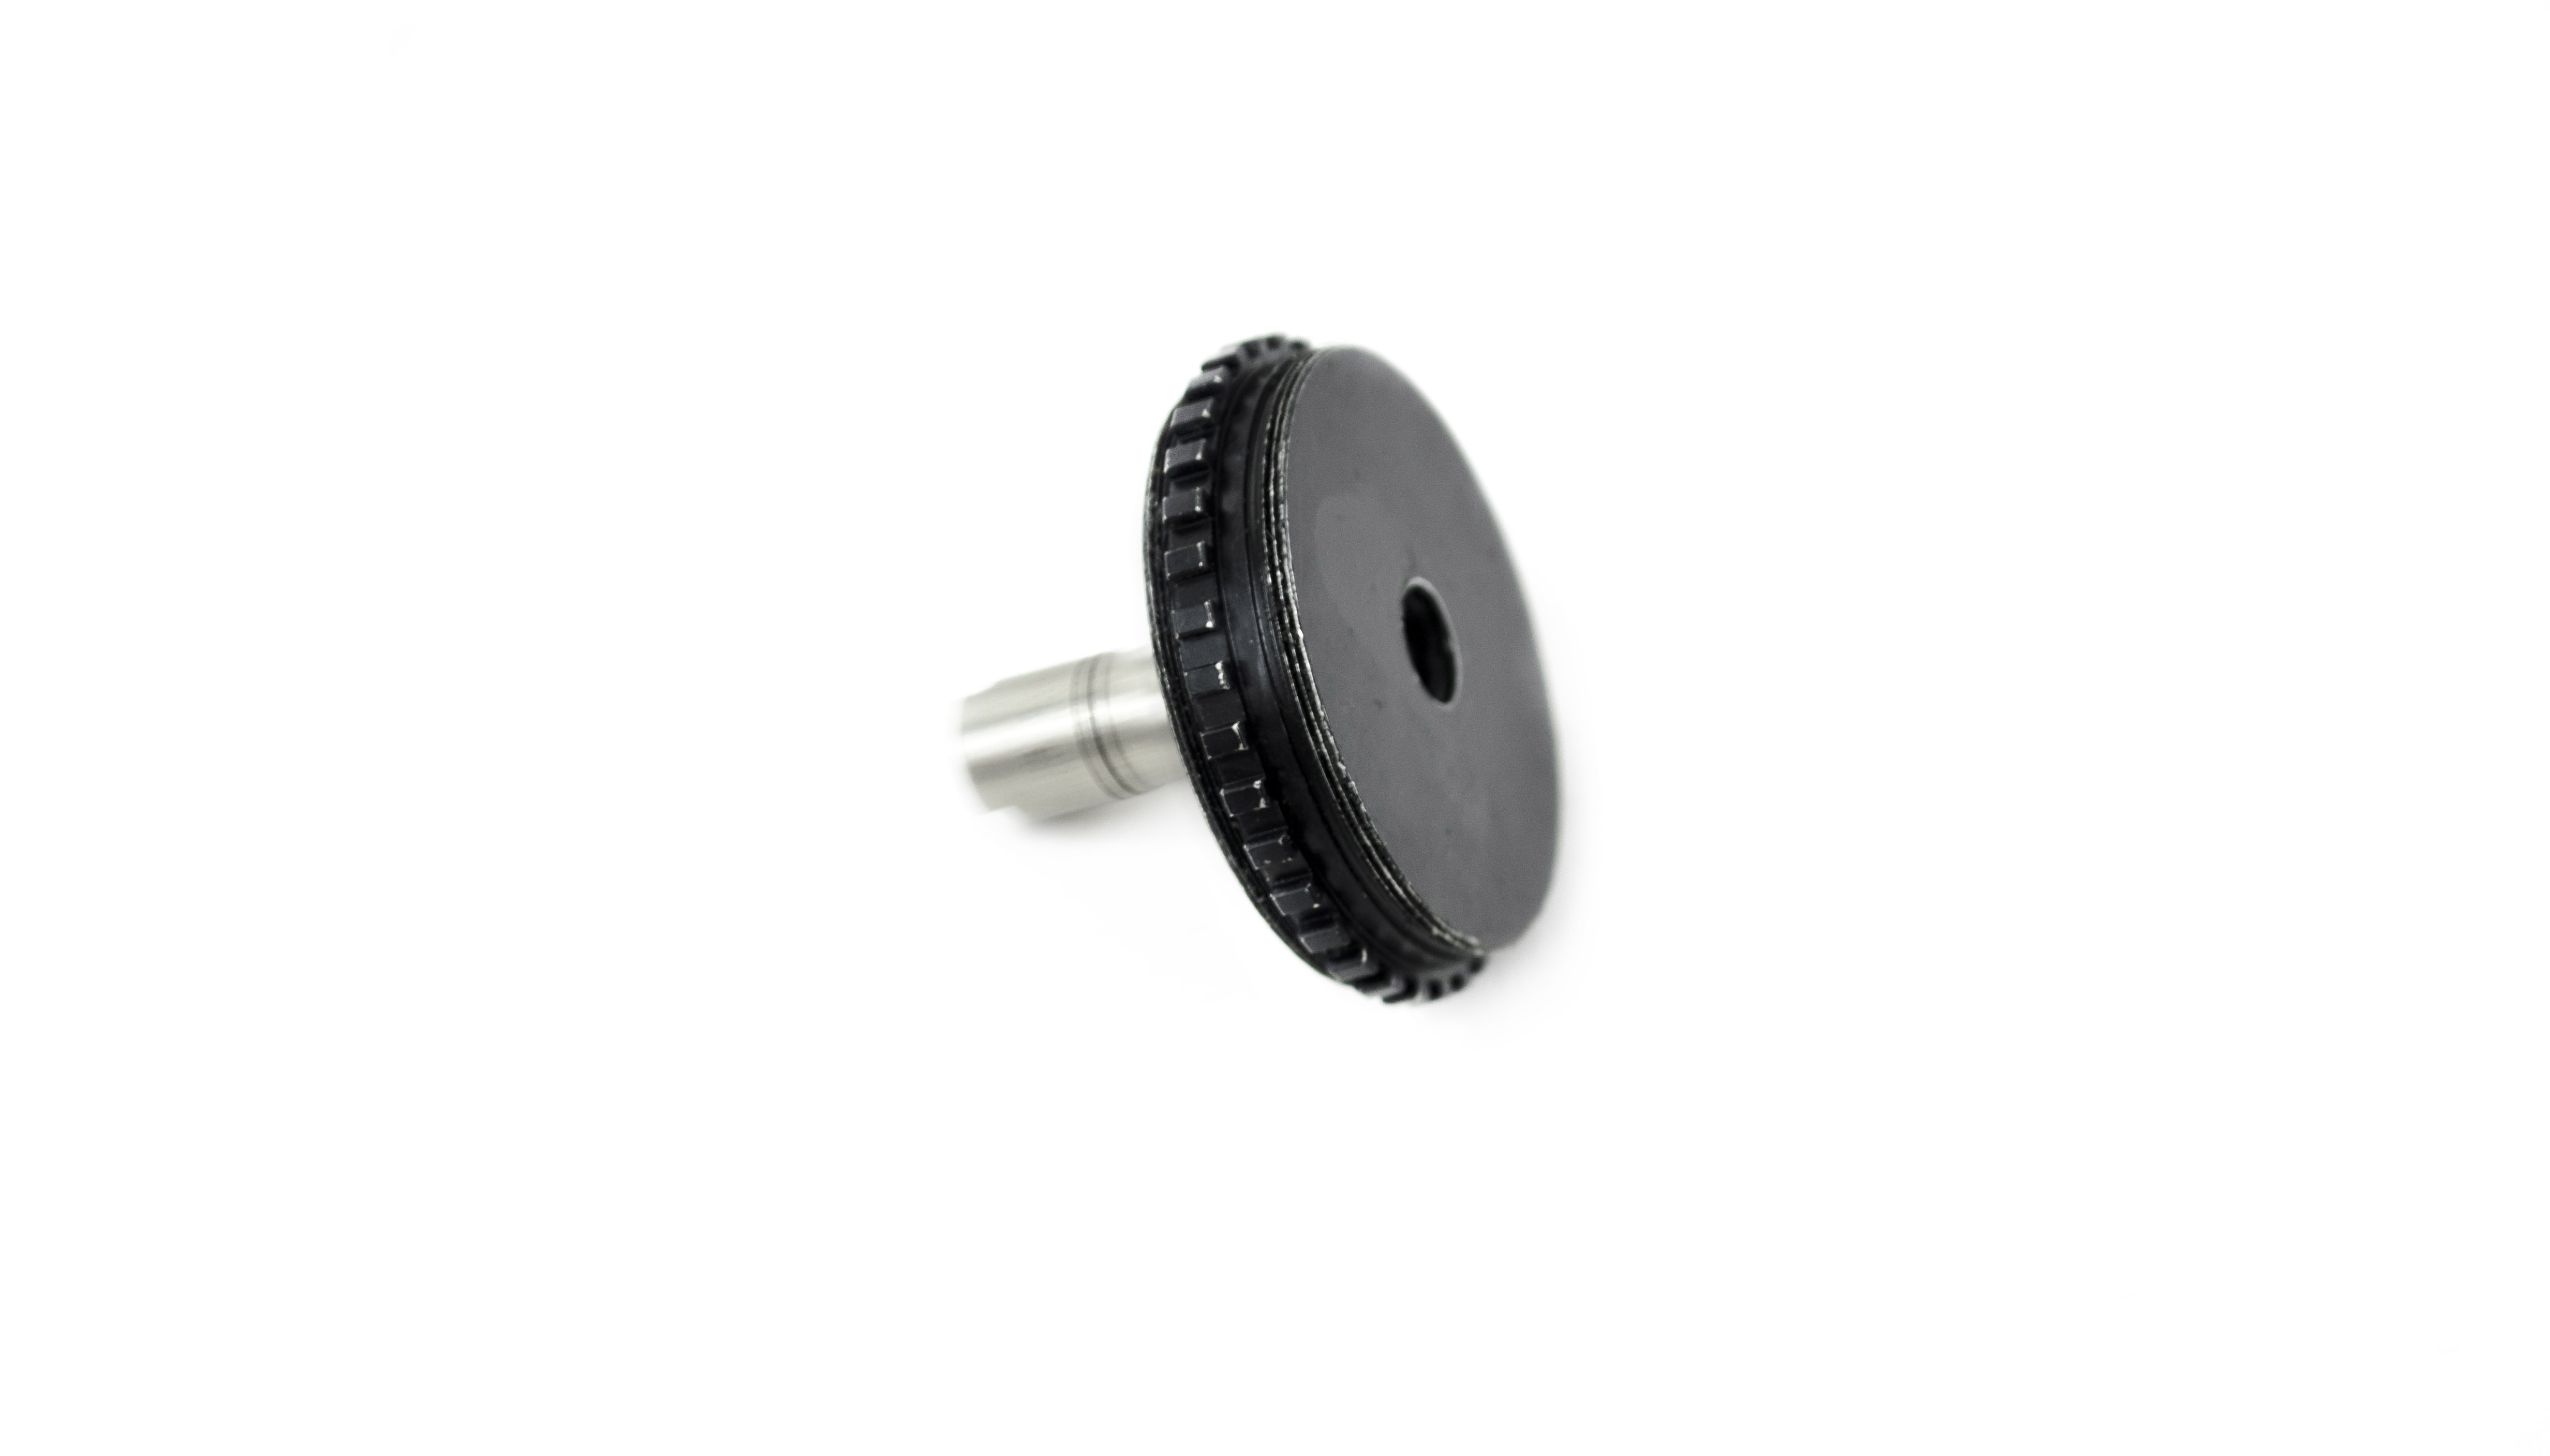 OEM Control Knob (Up/Down) Shaft Cover - 10 Series